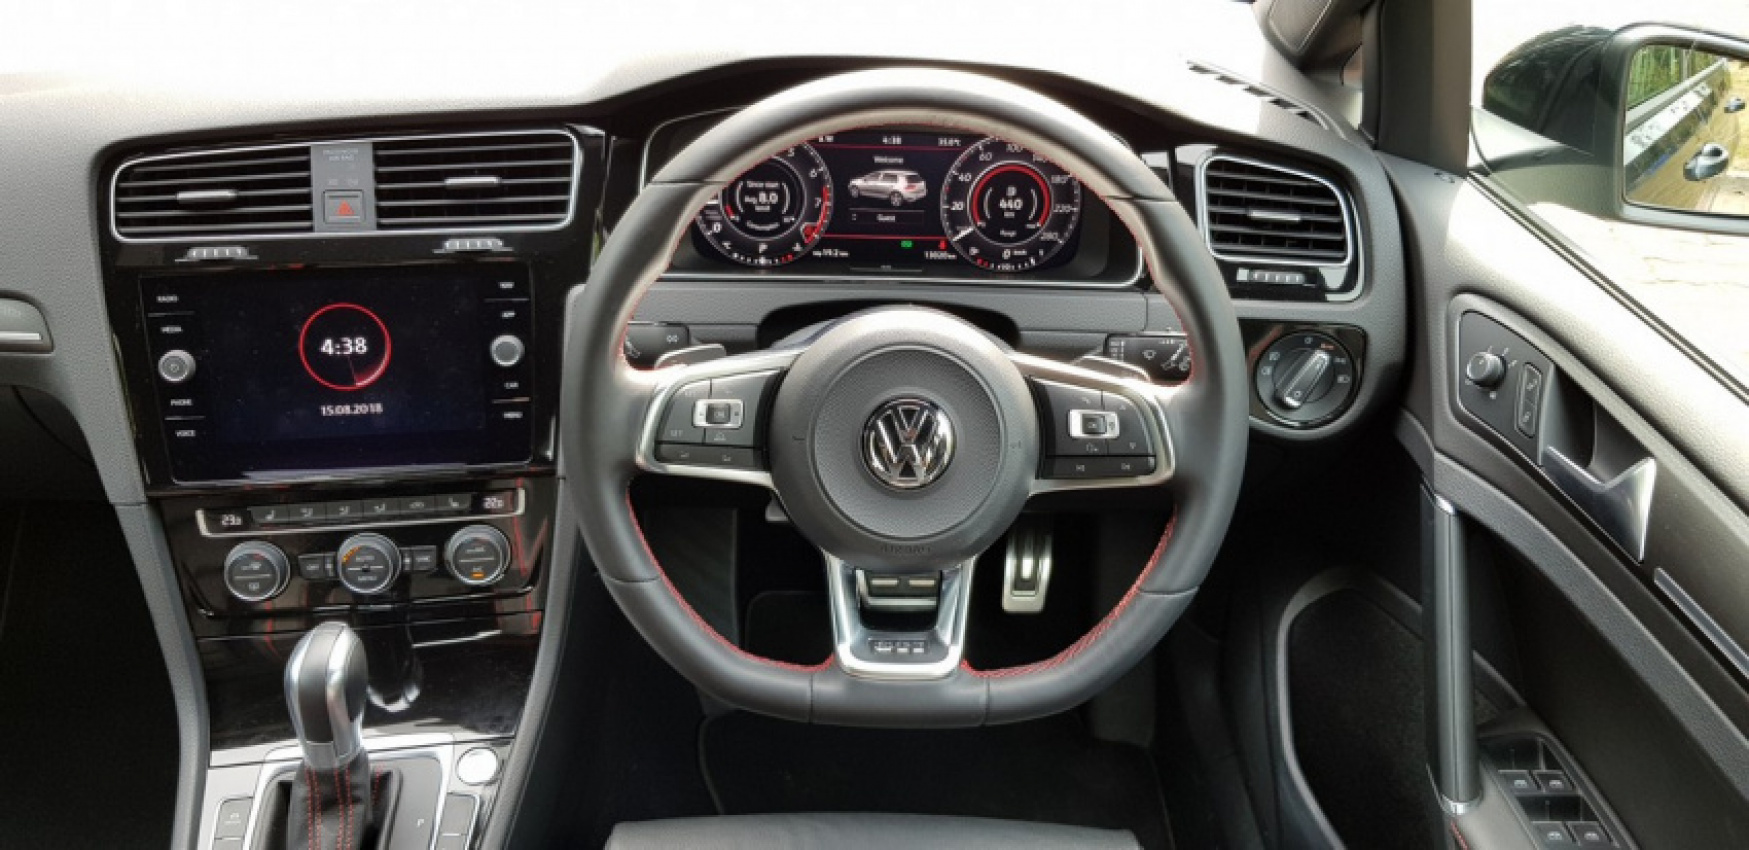 autos, car brands, cars, volkswagen, hatchback, malaysia, review, test drive, volkswagen malaysia, volkswagen golf gti 7.5 – tried, tested and proven